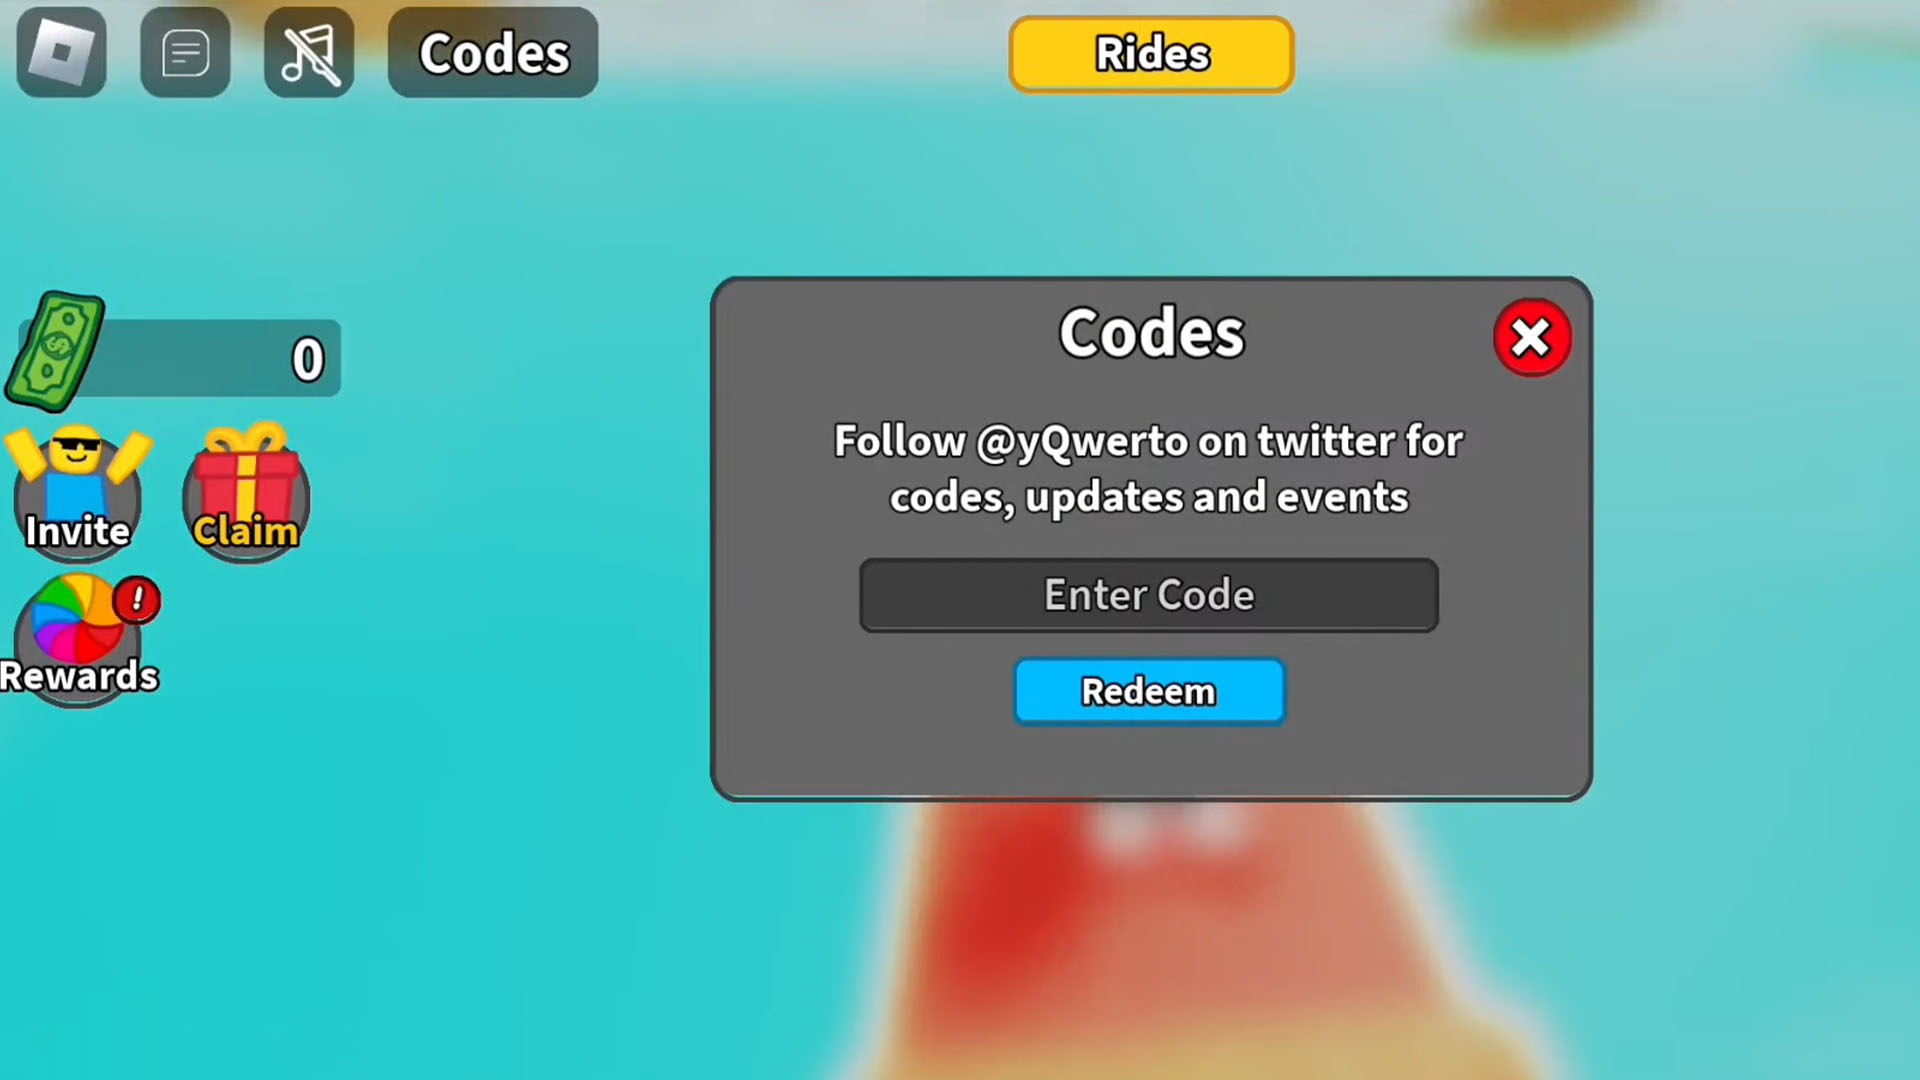 Anime Fly Race Codes - Roblox - December 2023 